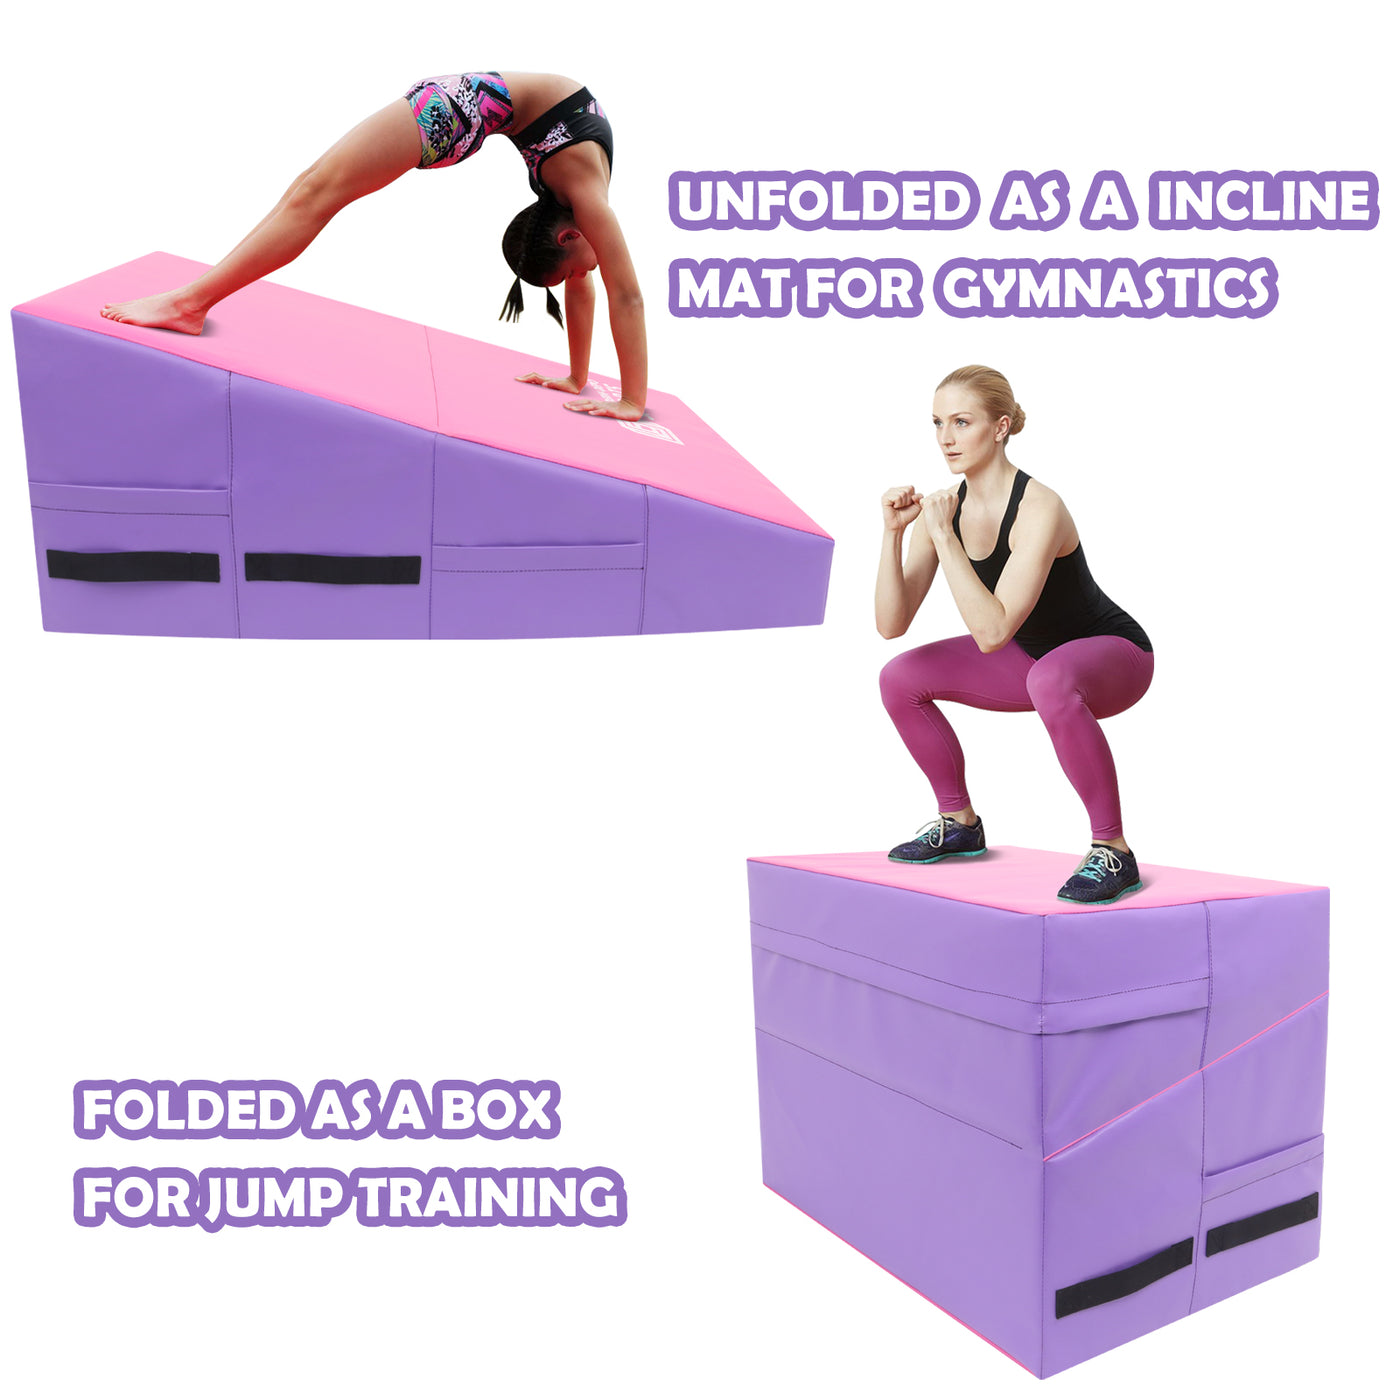 Gymnastics Wedge Mats 33" X 23.6" X 13.4" Folding for Home Use | Incline Mat Cheese Wedge With Zip Fastener, Waterproof Vinyl Cover, EPE Foam for Exercise, Tumbling, Yoga, Pilates, Pink Purple